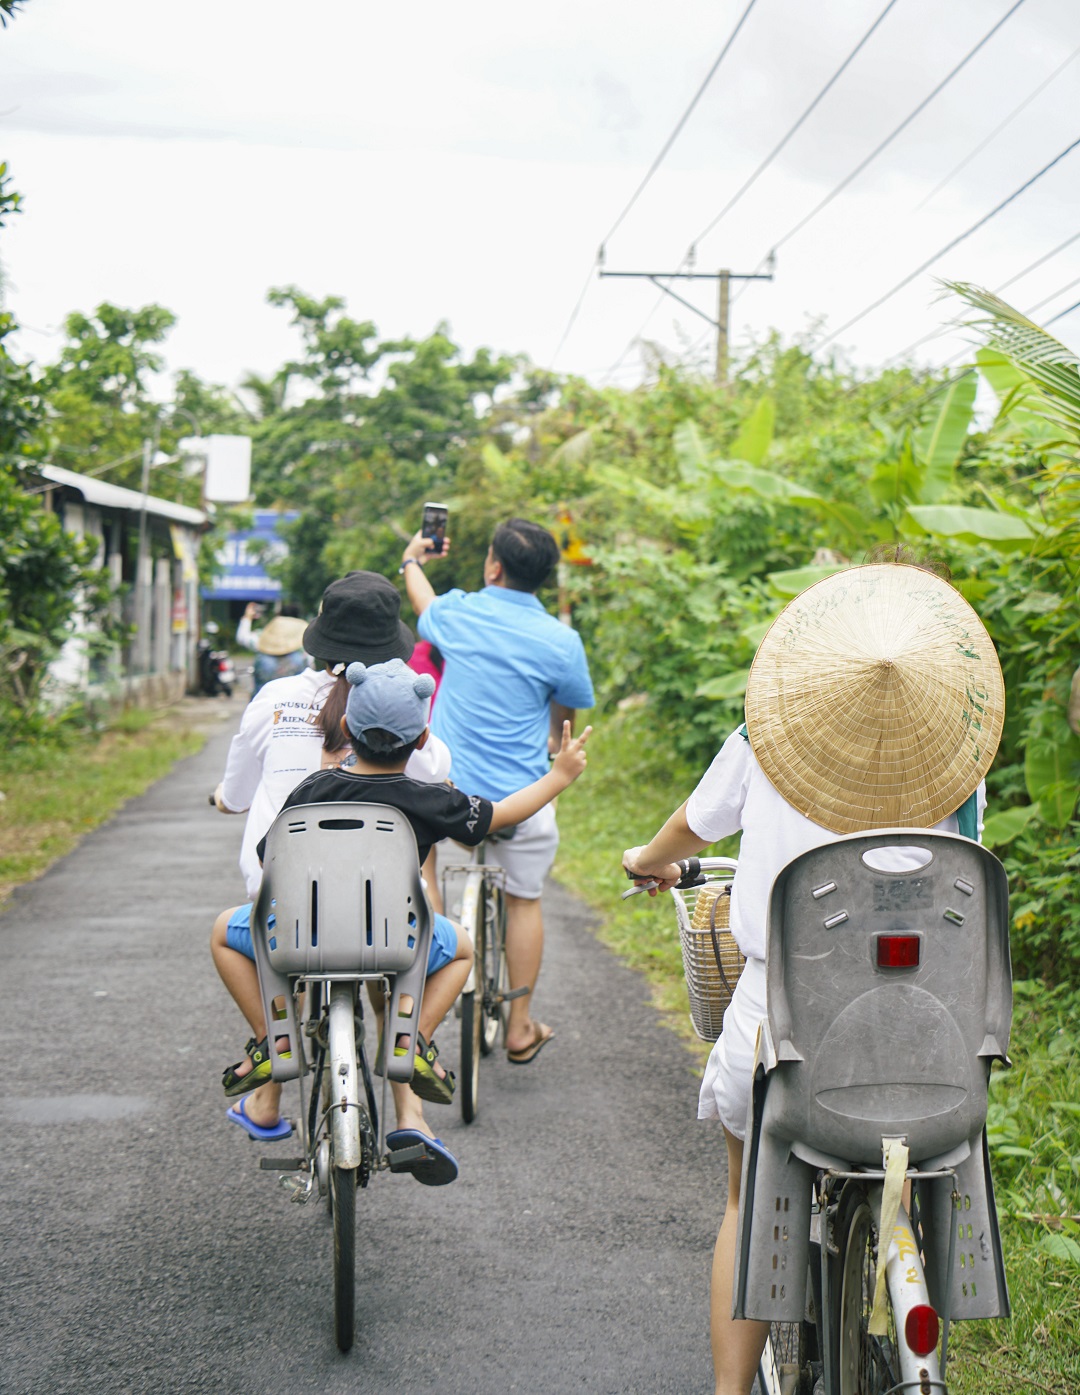 Tourists ride bicycles around Tan Phong Island. Most of roads are concrete, facilitating the travel. Photo: Nguyen Trung Au / Tuoi Tre News